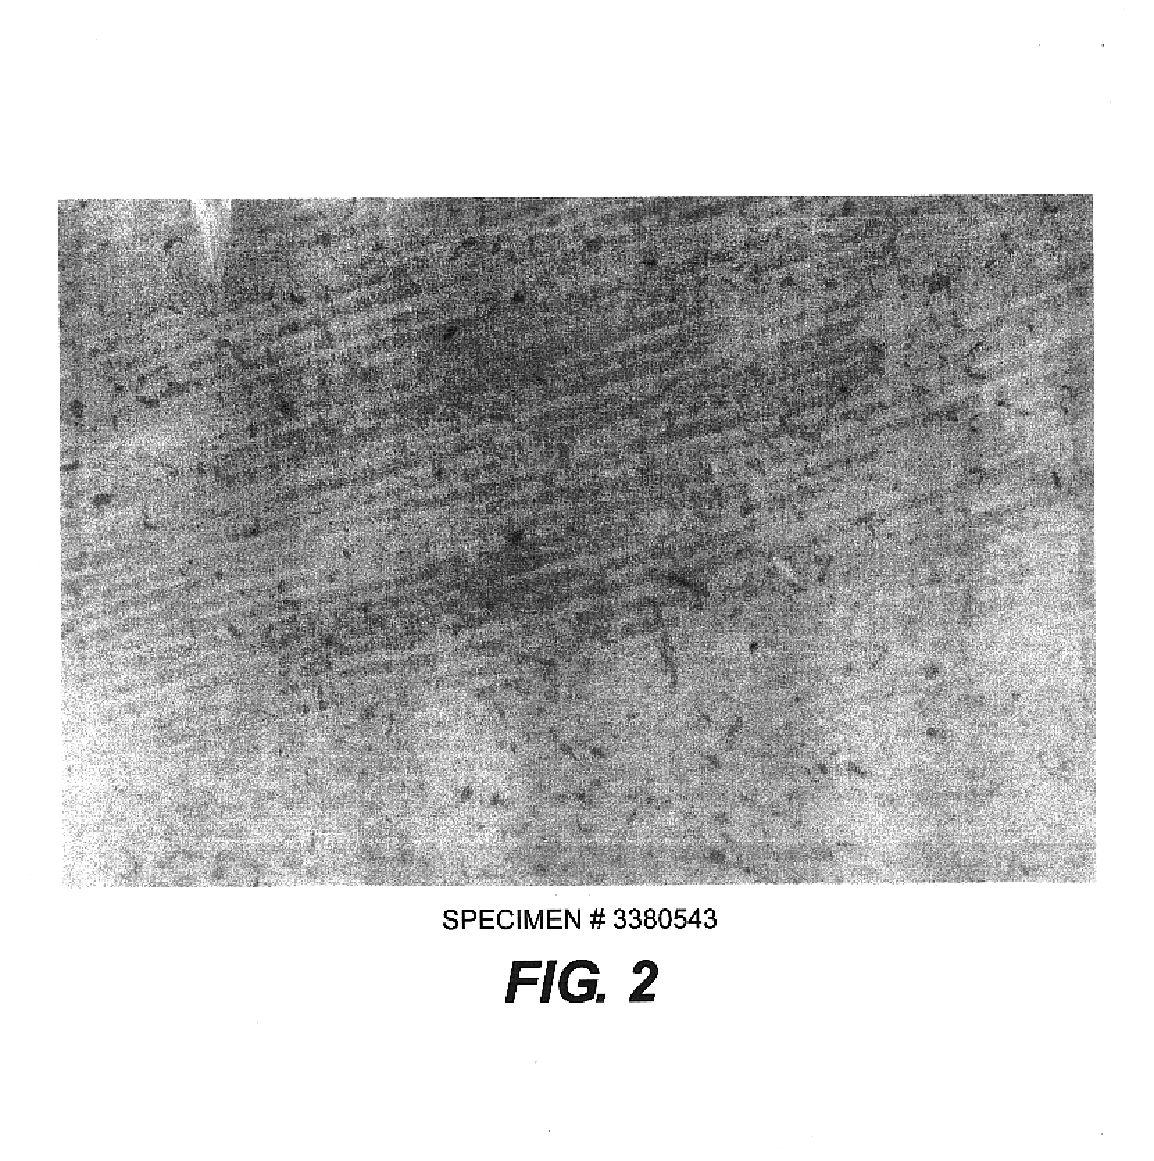 Composition for stabilizing corneal tissue during or after orthokeratology lens wear